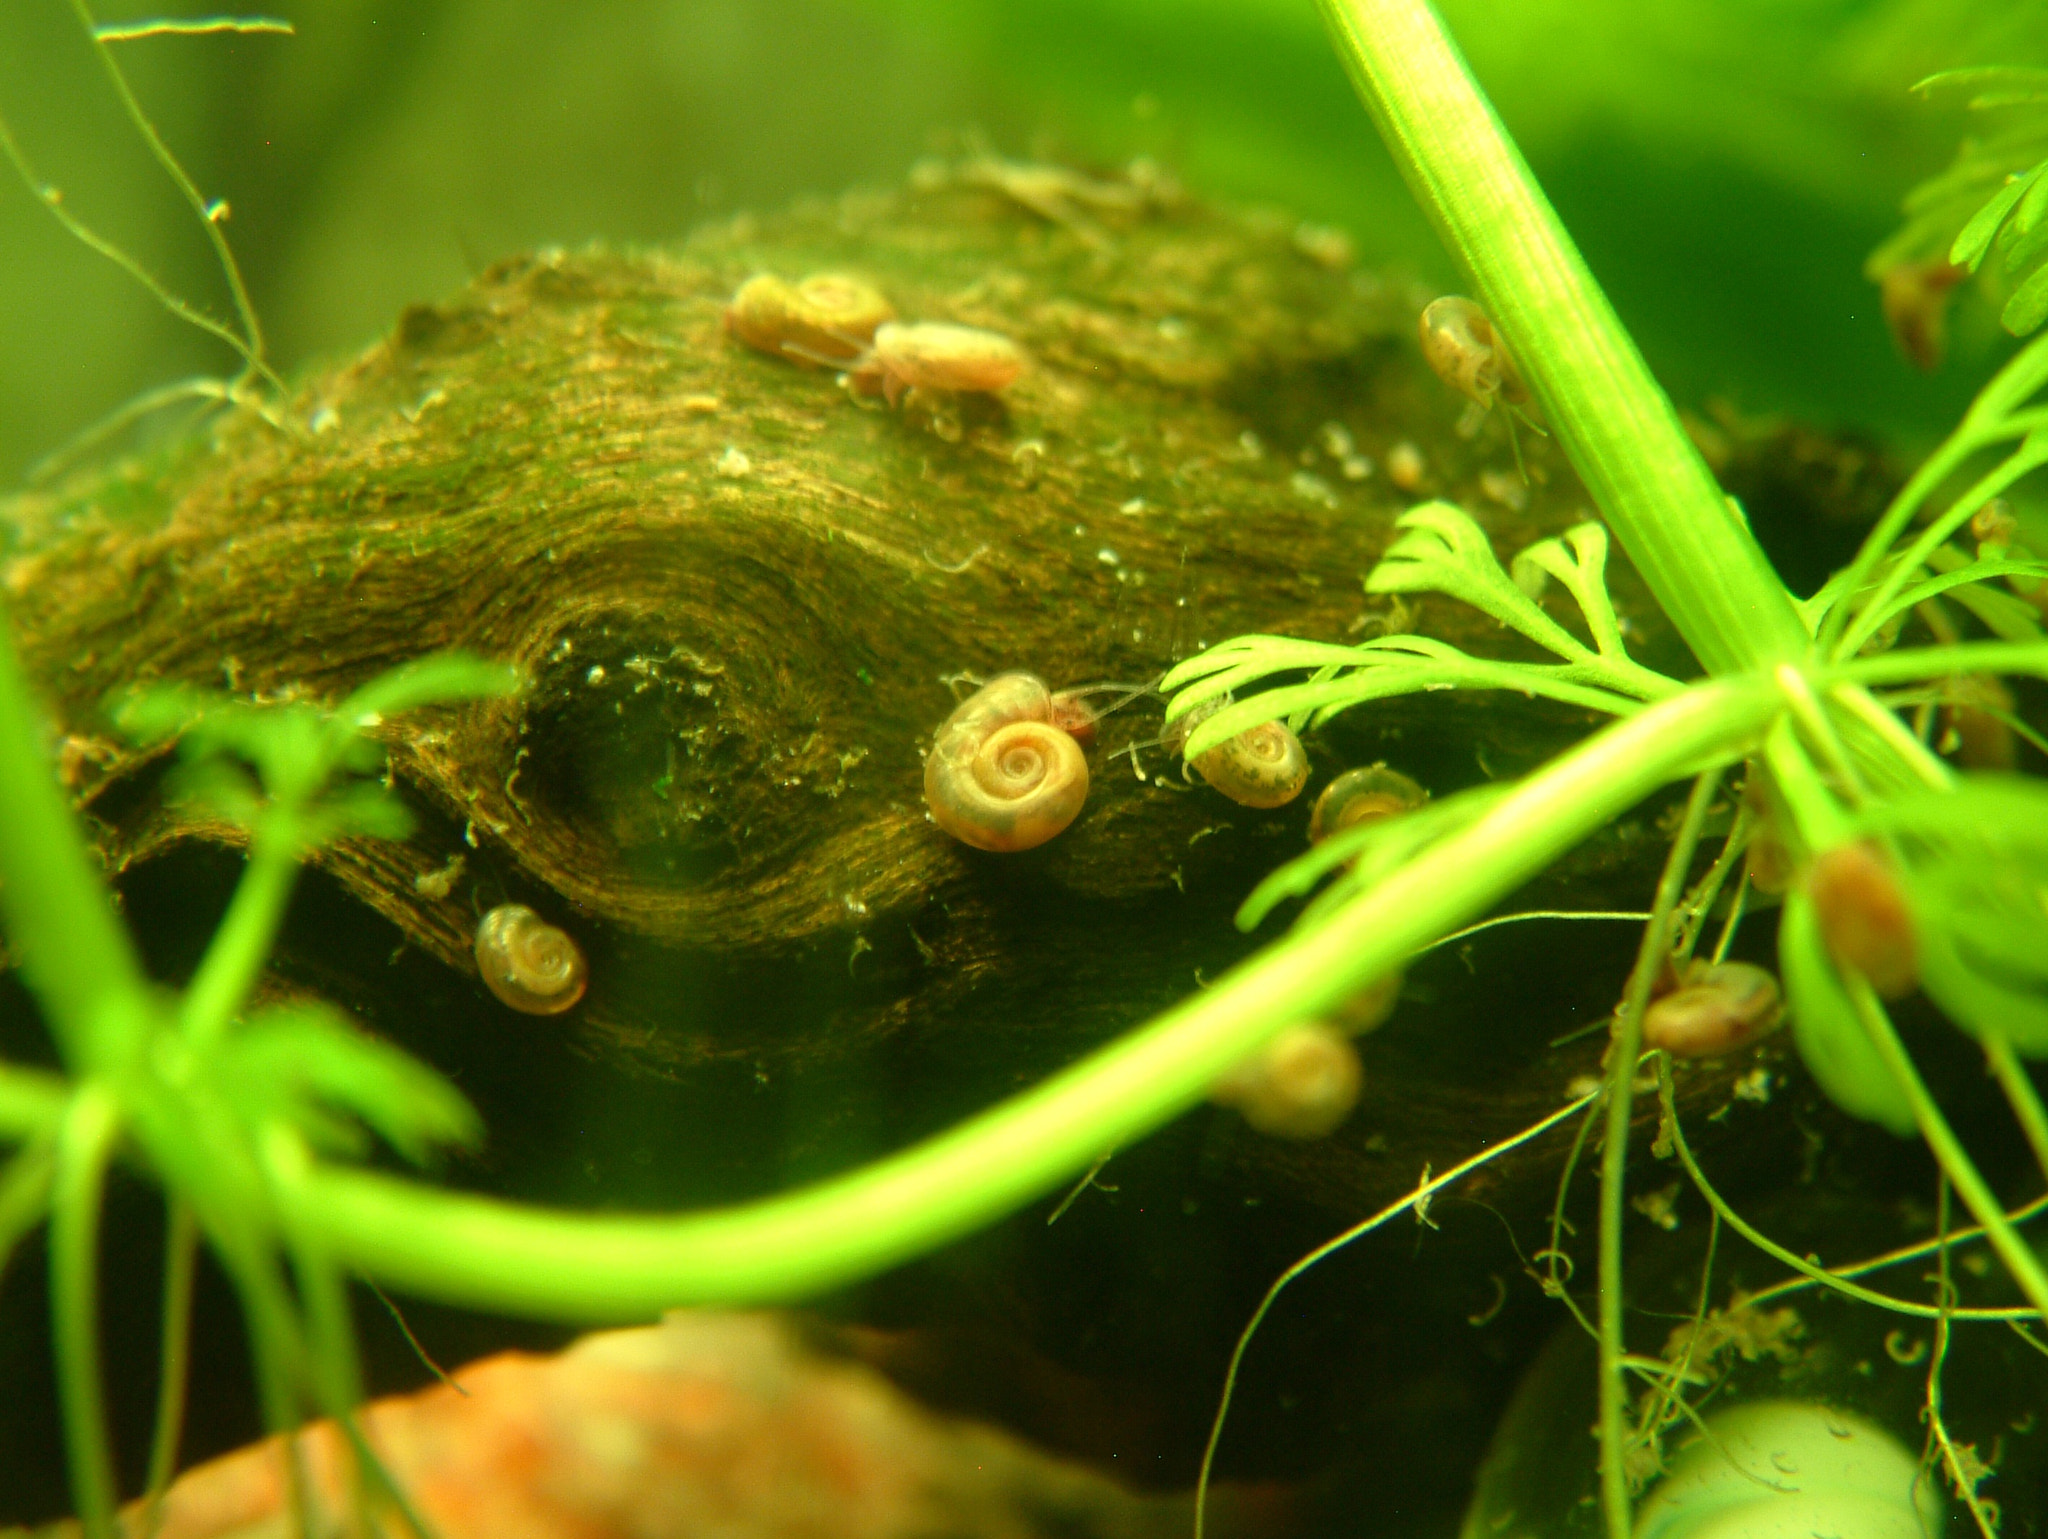 Fujifilm FinePix S602 ZOOM sample photo. More water snails photography